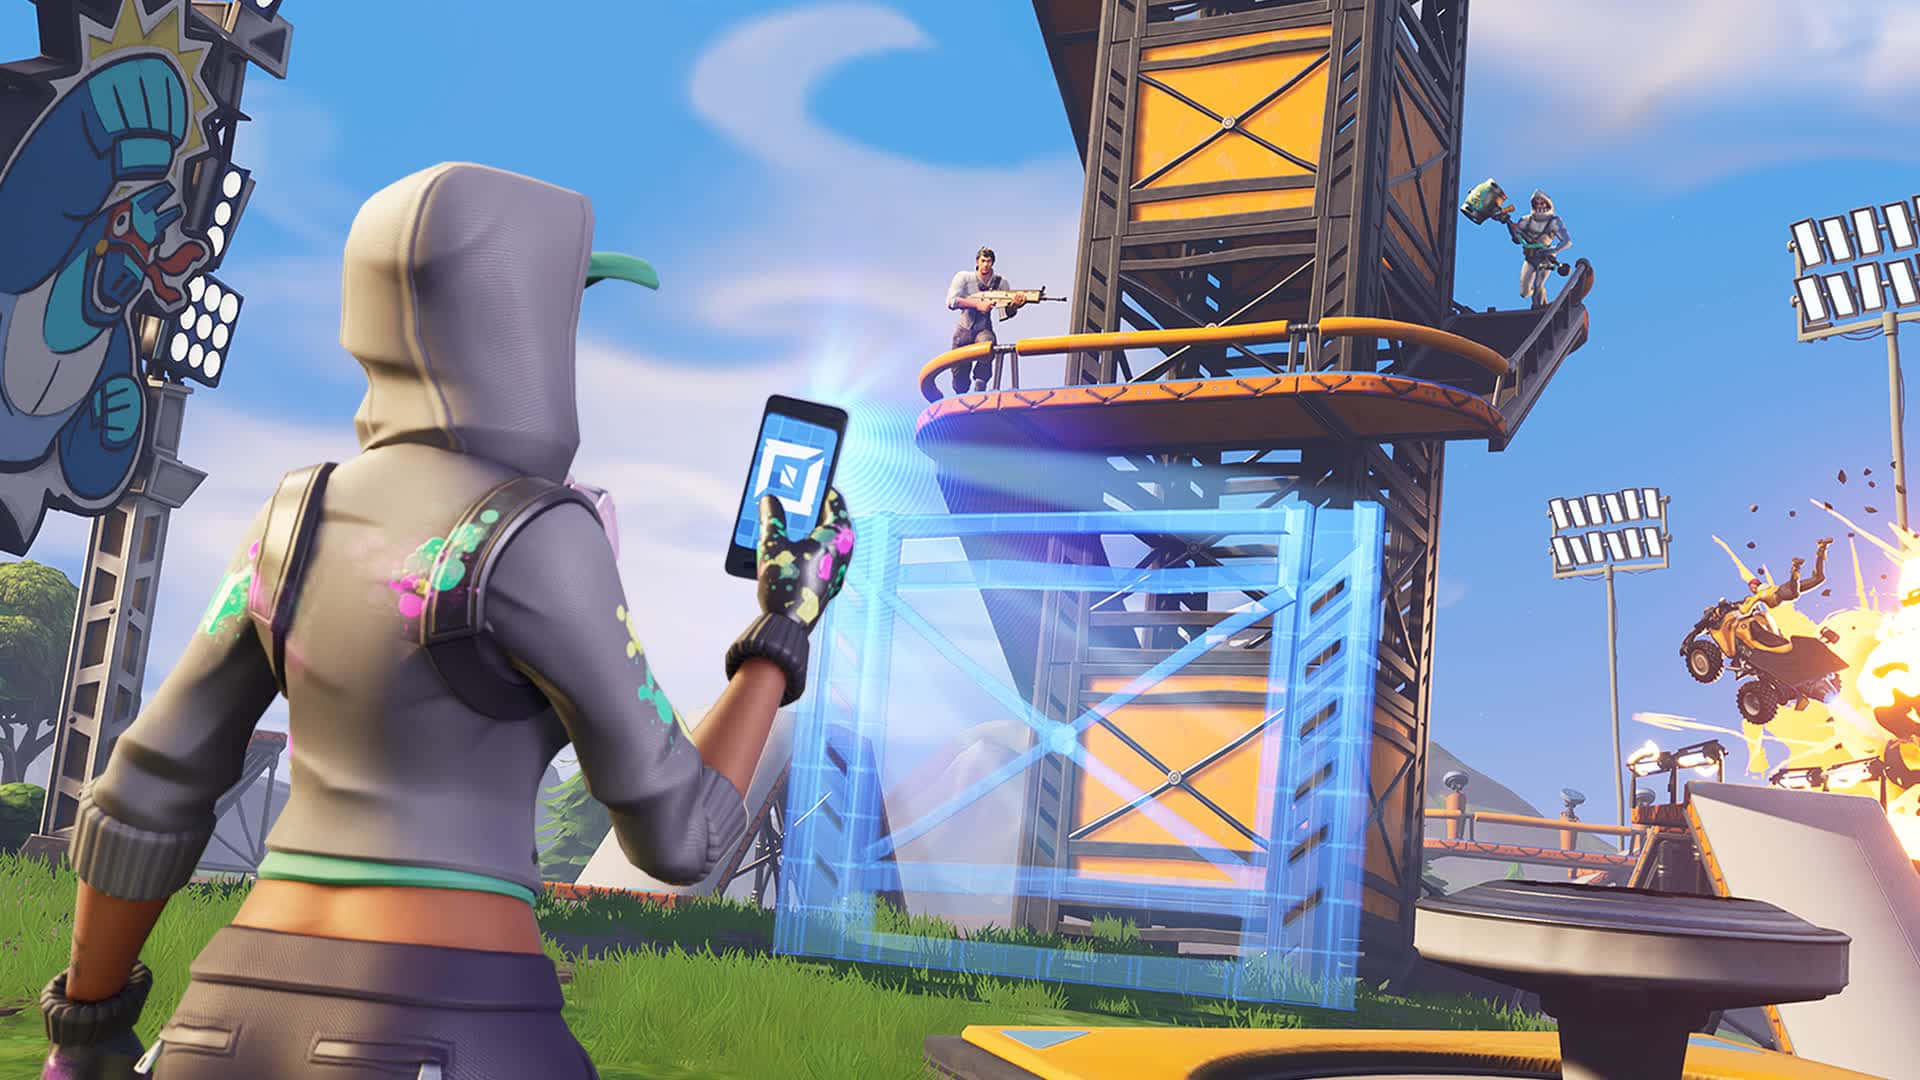 Take your gaming to the next level with Fortnite Cool!